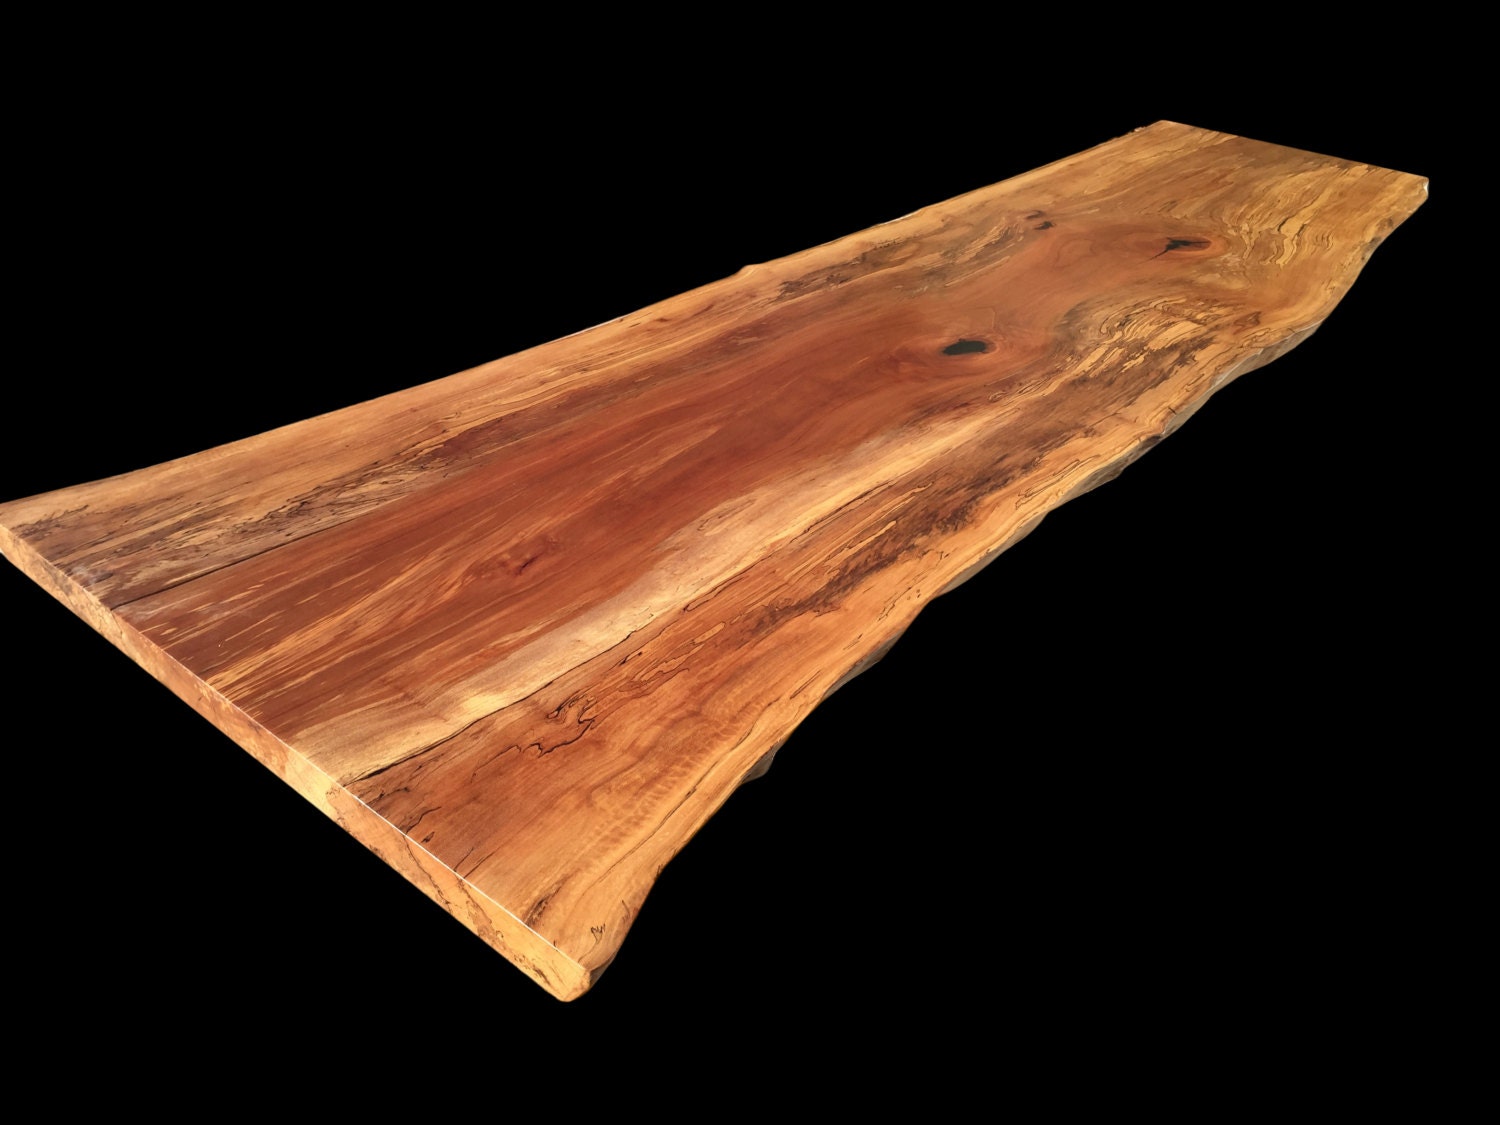 Live Edge Table Tops & Live Edge Counter Tops. Beautiful live